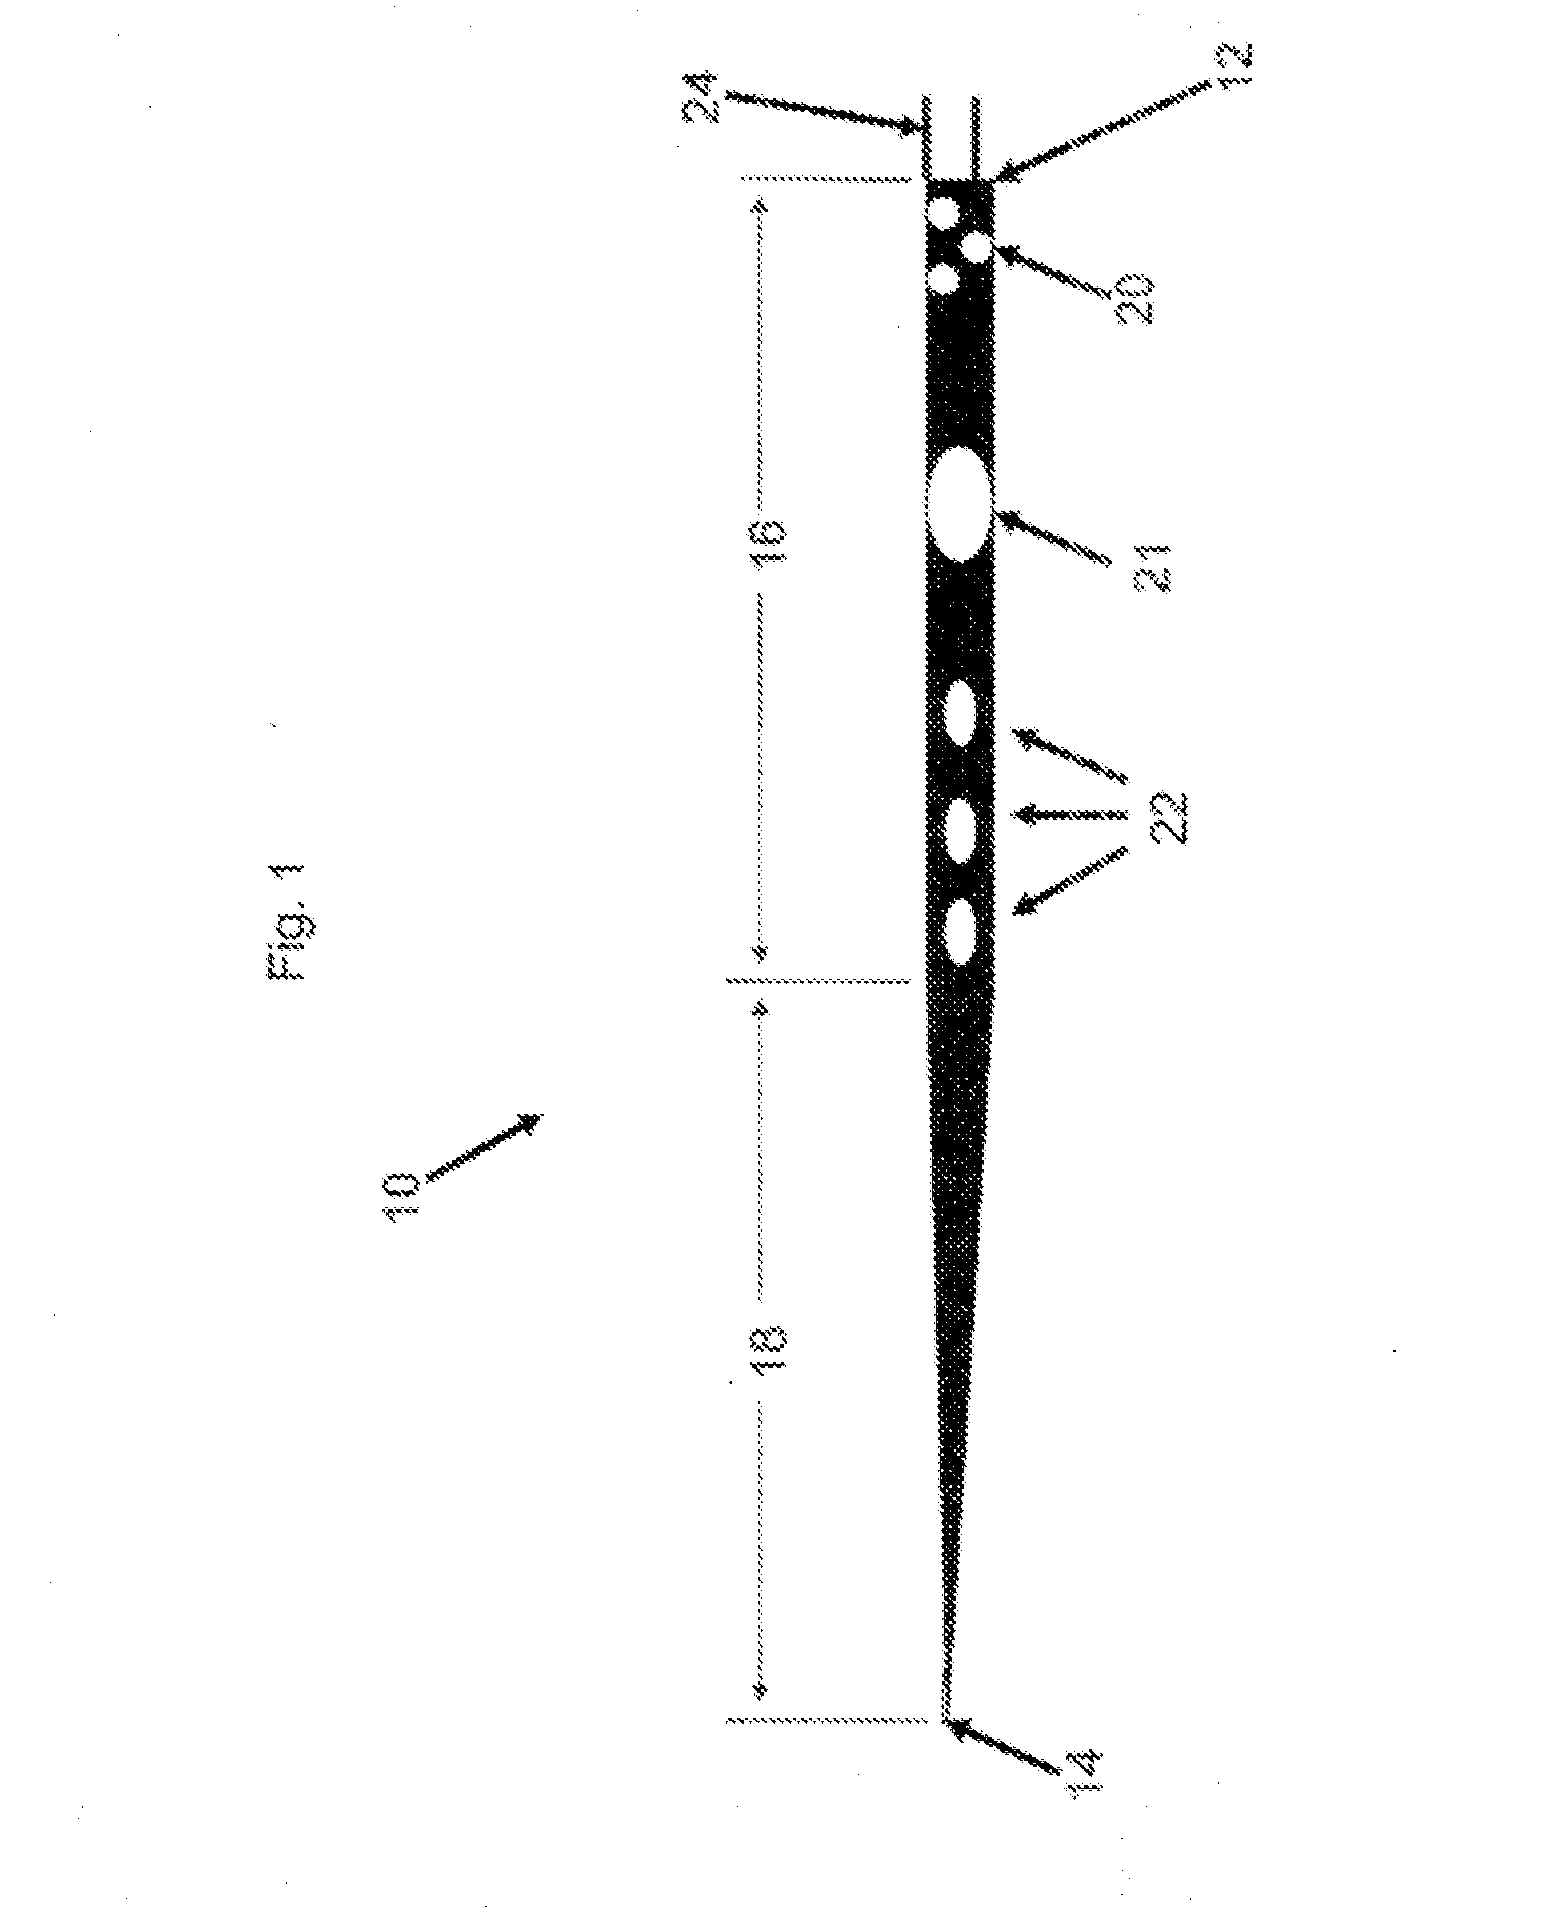 Fixation device for proximal elbow fractures and method of using same